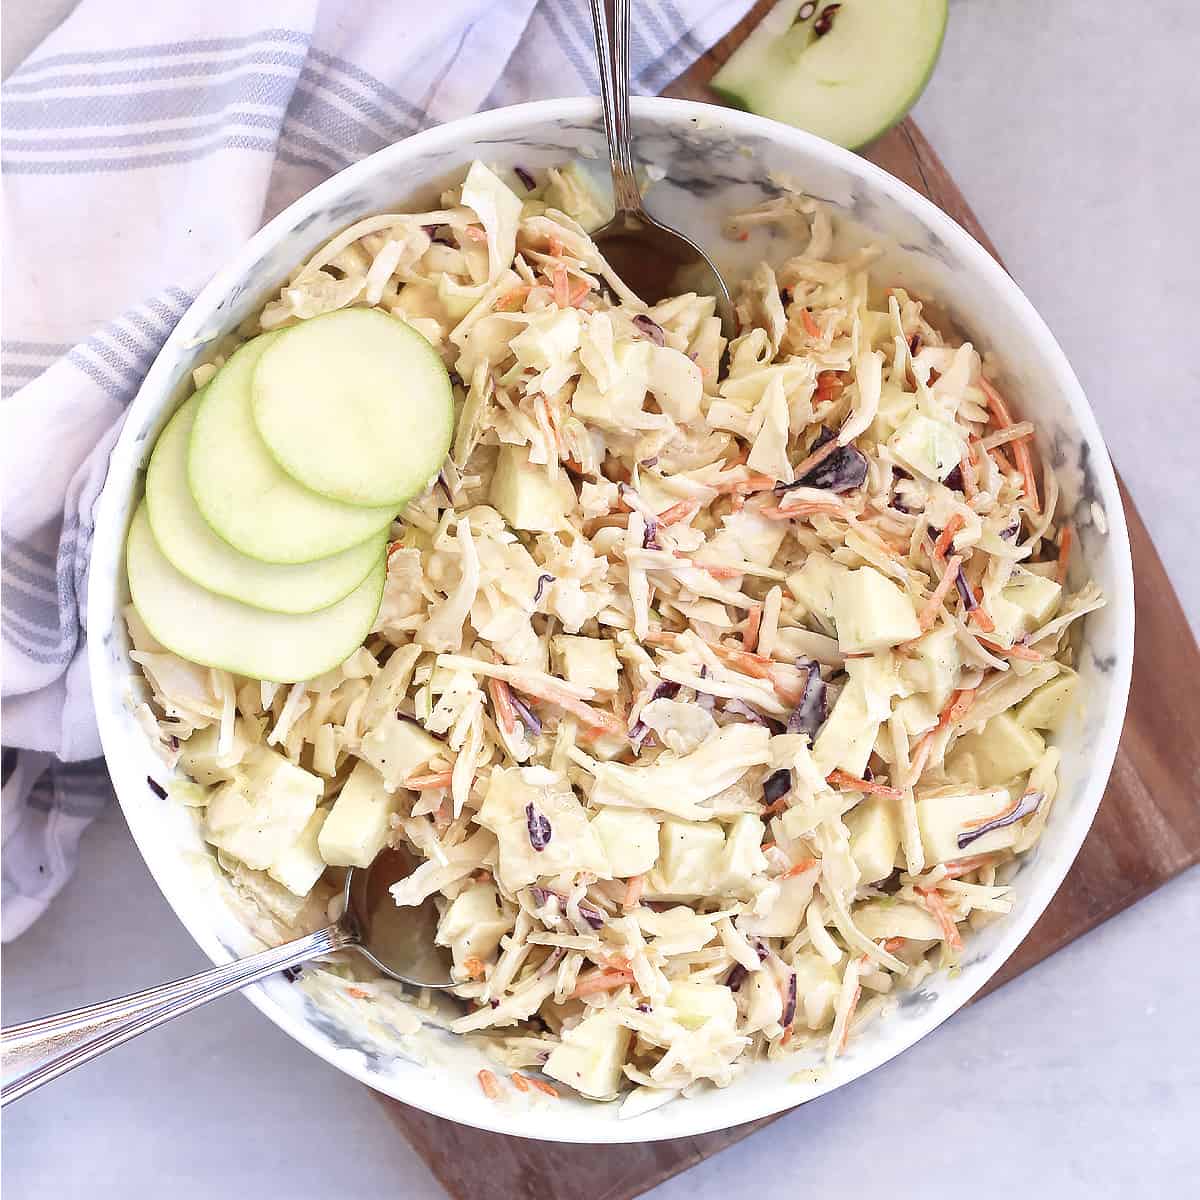 Two serving spoons in a bowl of cabbage and apple slaw.